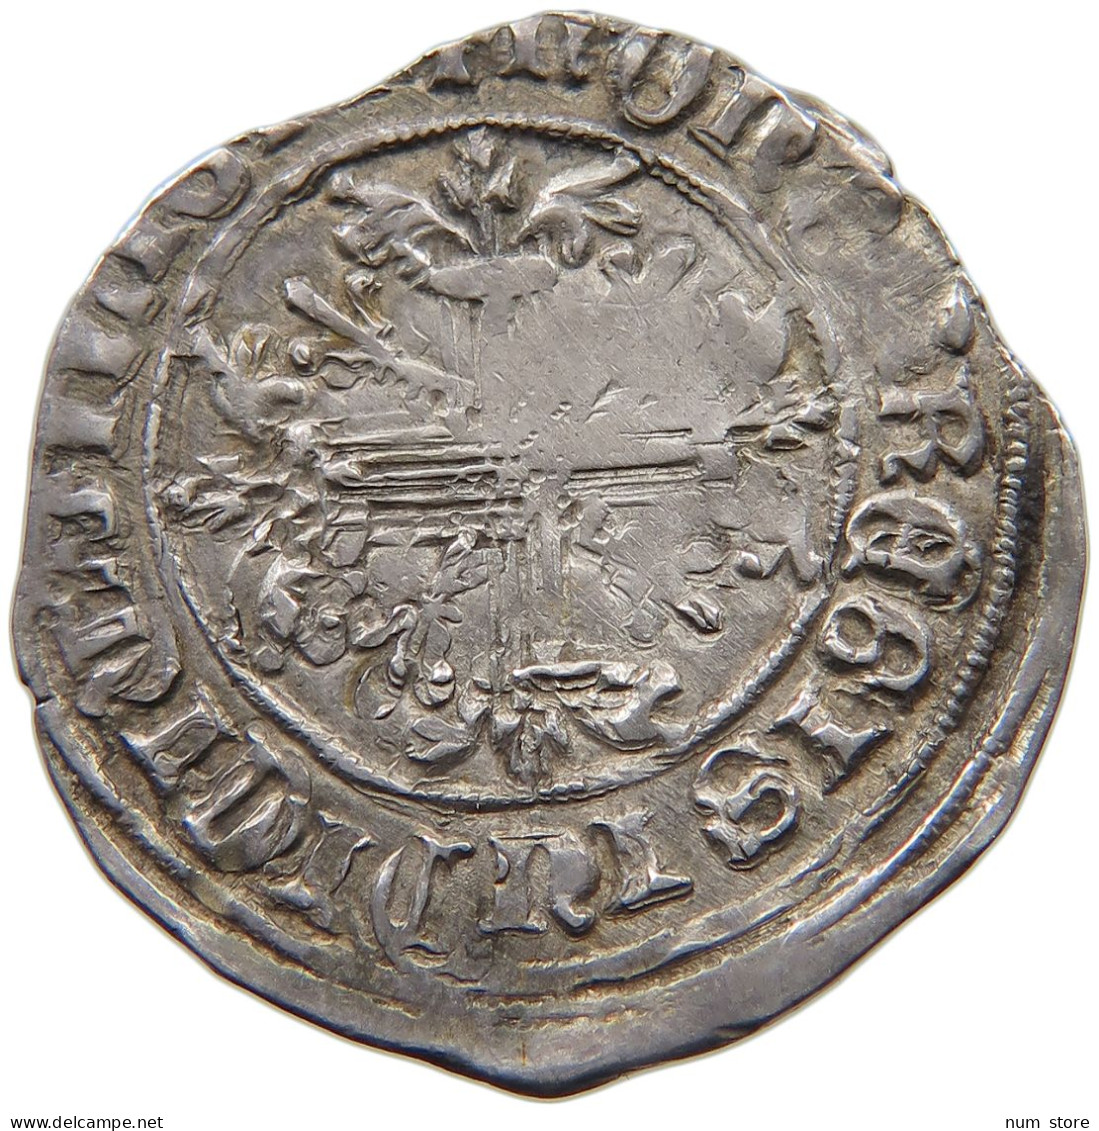 ITALY NAPLES SICILY GIGLIATO 1309-1343 ROBERT D'ANJOU (1309-1343) #MA 024297 - Neapel & Sizilien